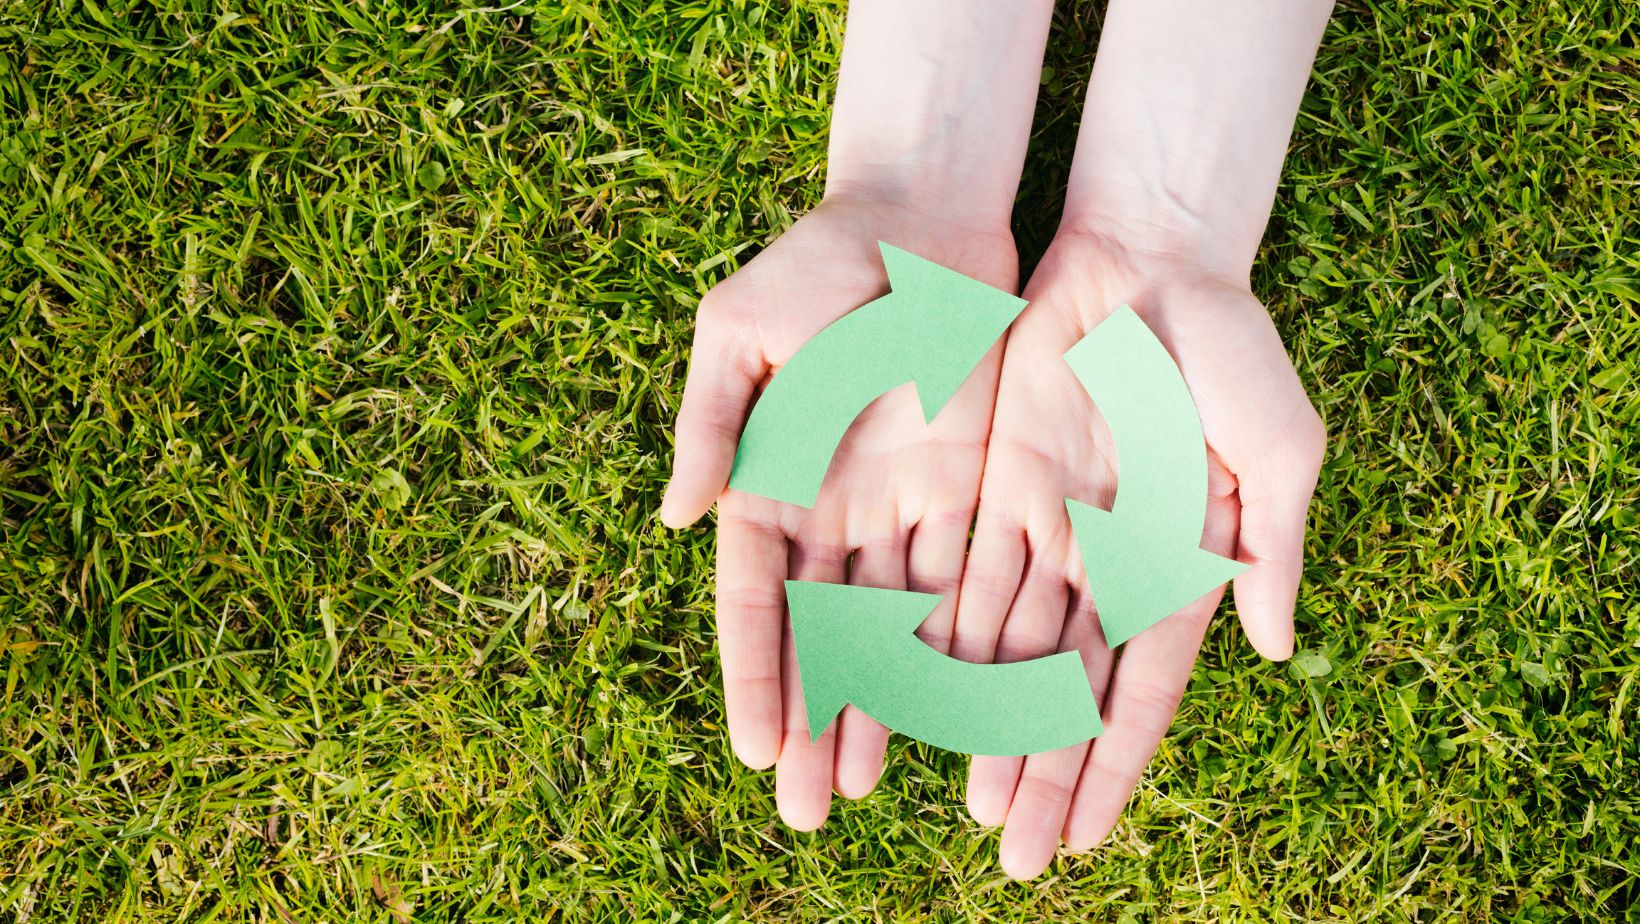 Hands holding a recycling symbol